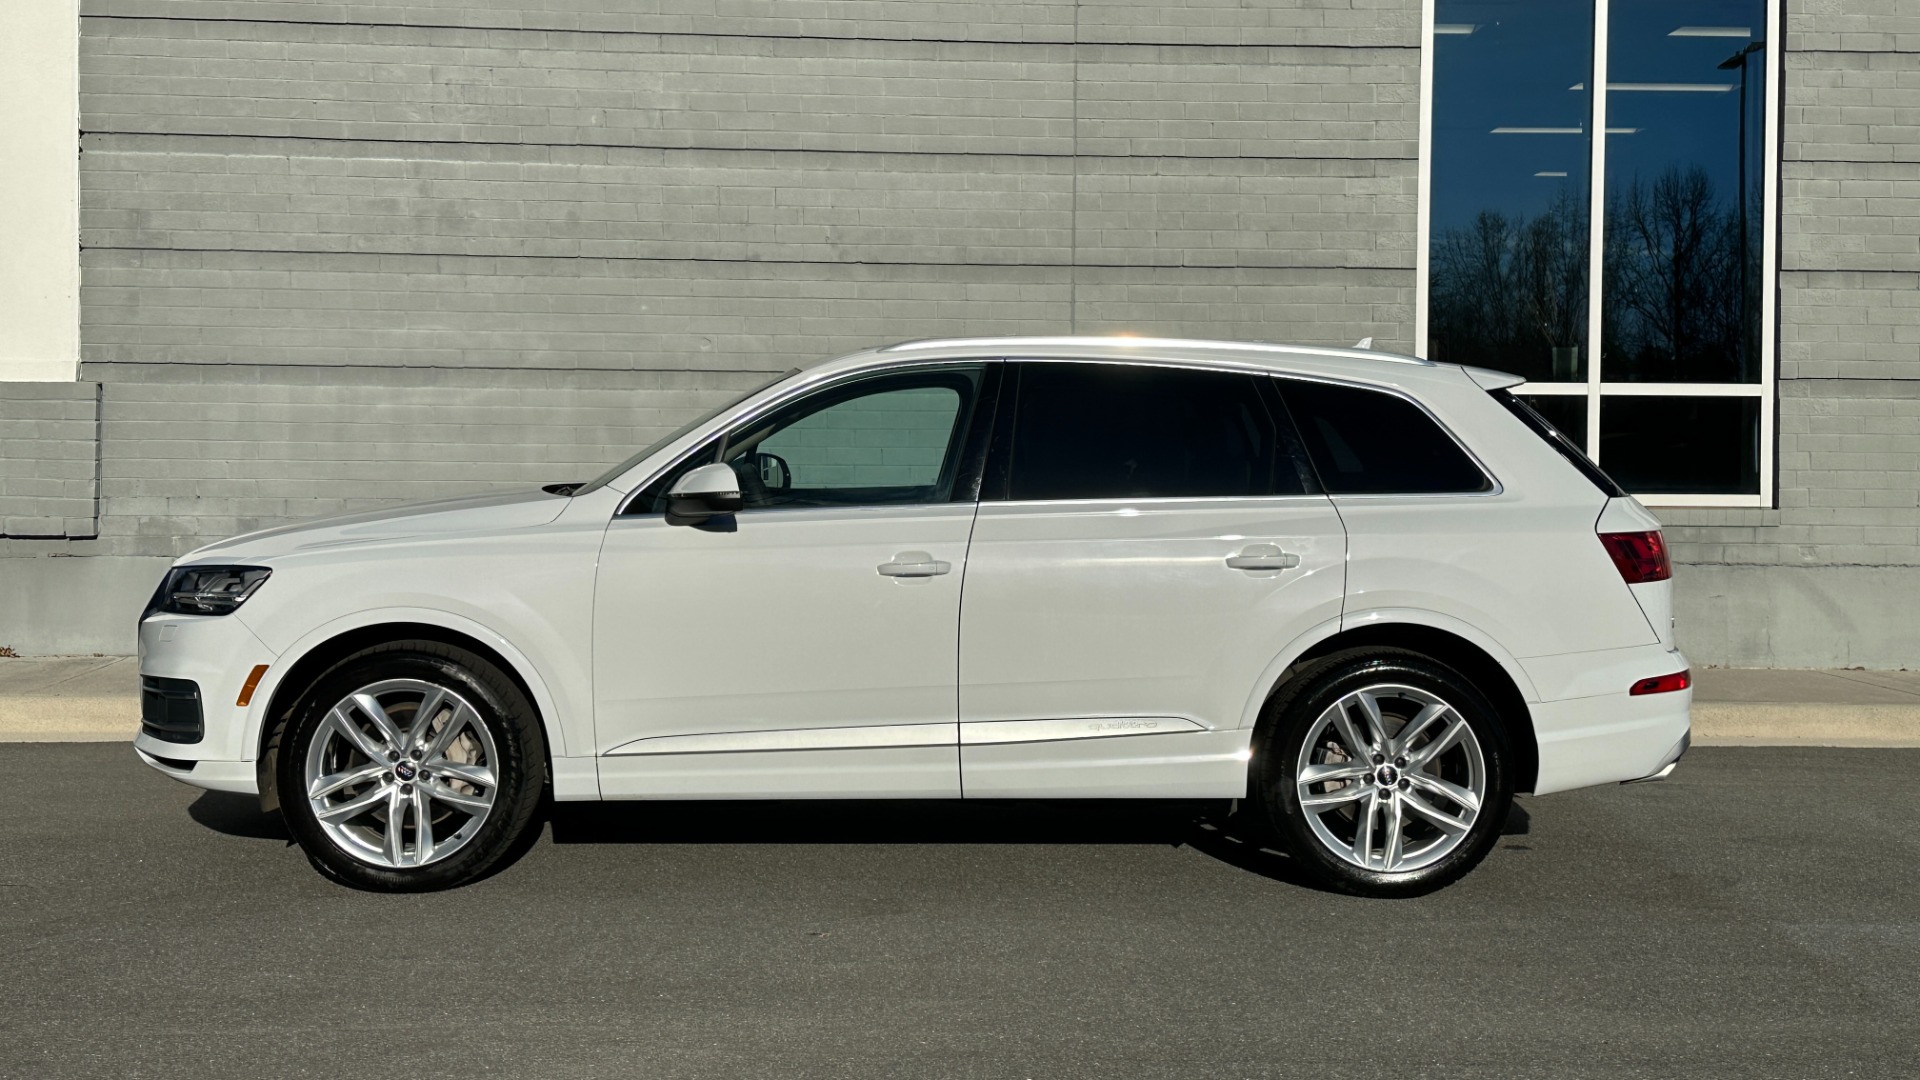 Used 2018 Audi Q7 PRESTIGE / COLD WEATHER PKG / TOWING PACKAGE / DRIVER ASSIST for sale $39,999 at Formula Imports in Charlotte NC 28227 3